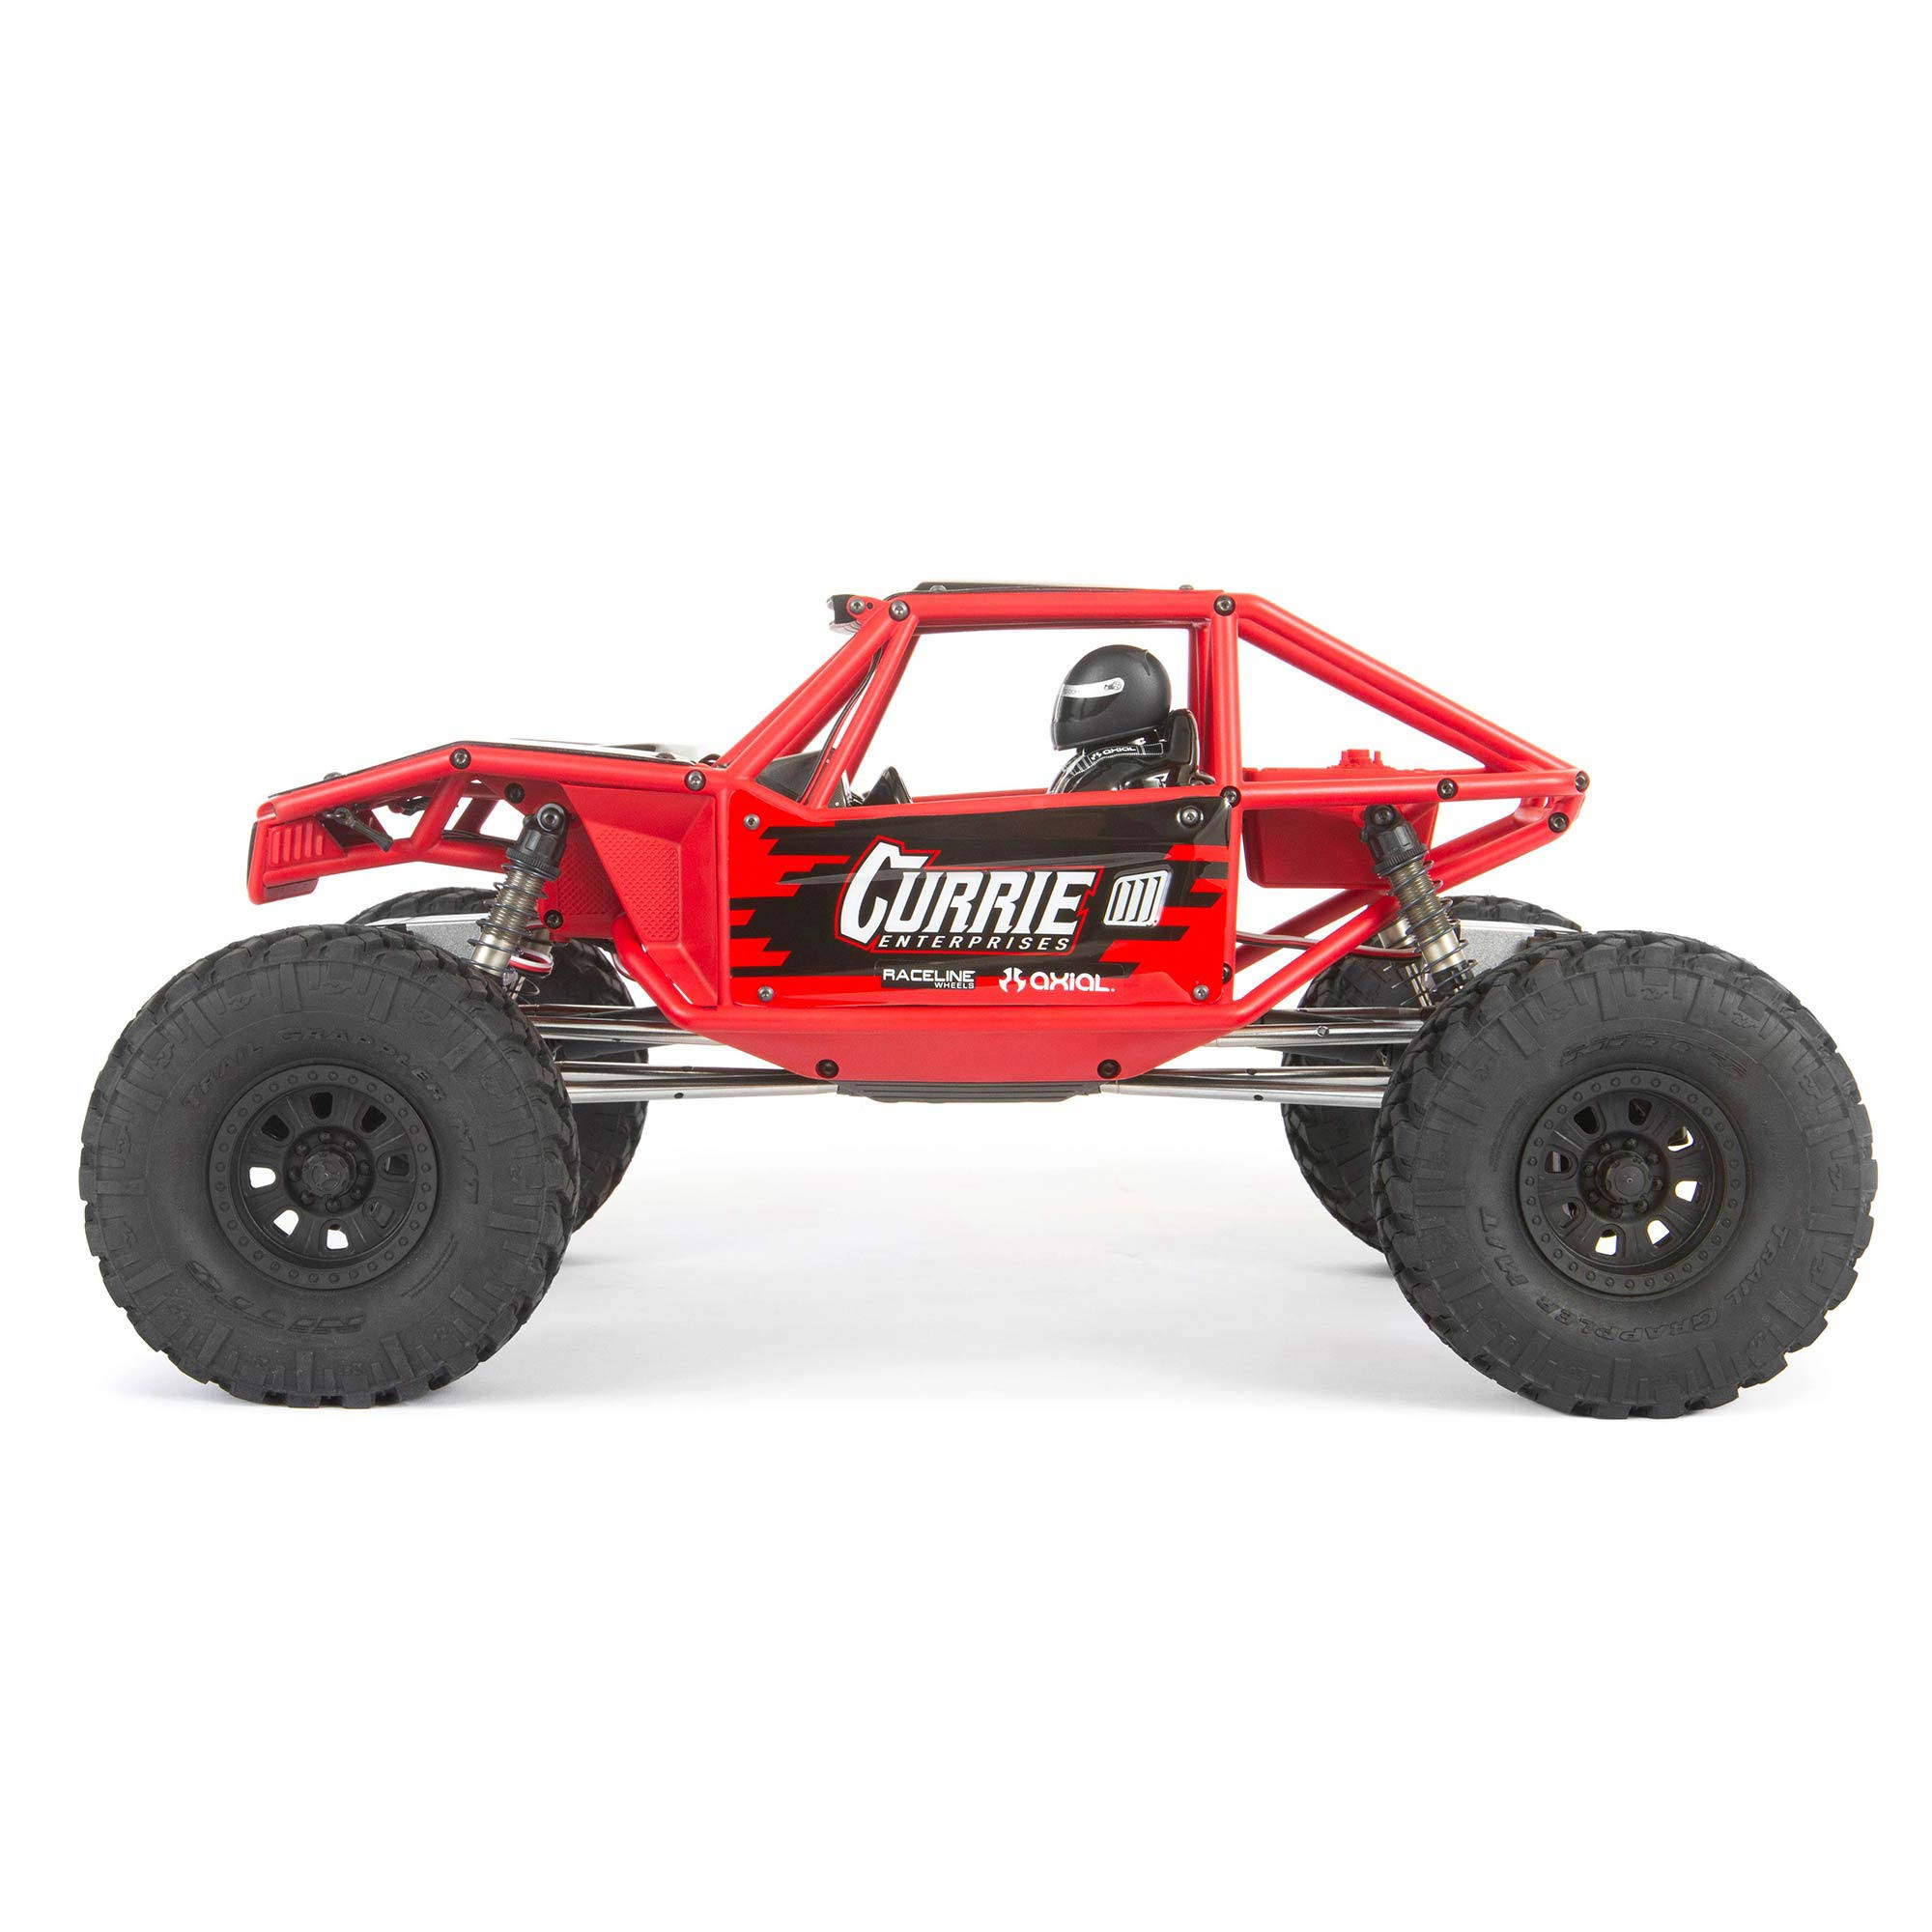 Axial RC Truck 1/10 Capra 1.9 4WS Unlimited Trail Buggy RTR (batteries and Charger Not Included), Red, AXI03022T1